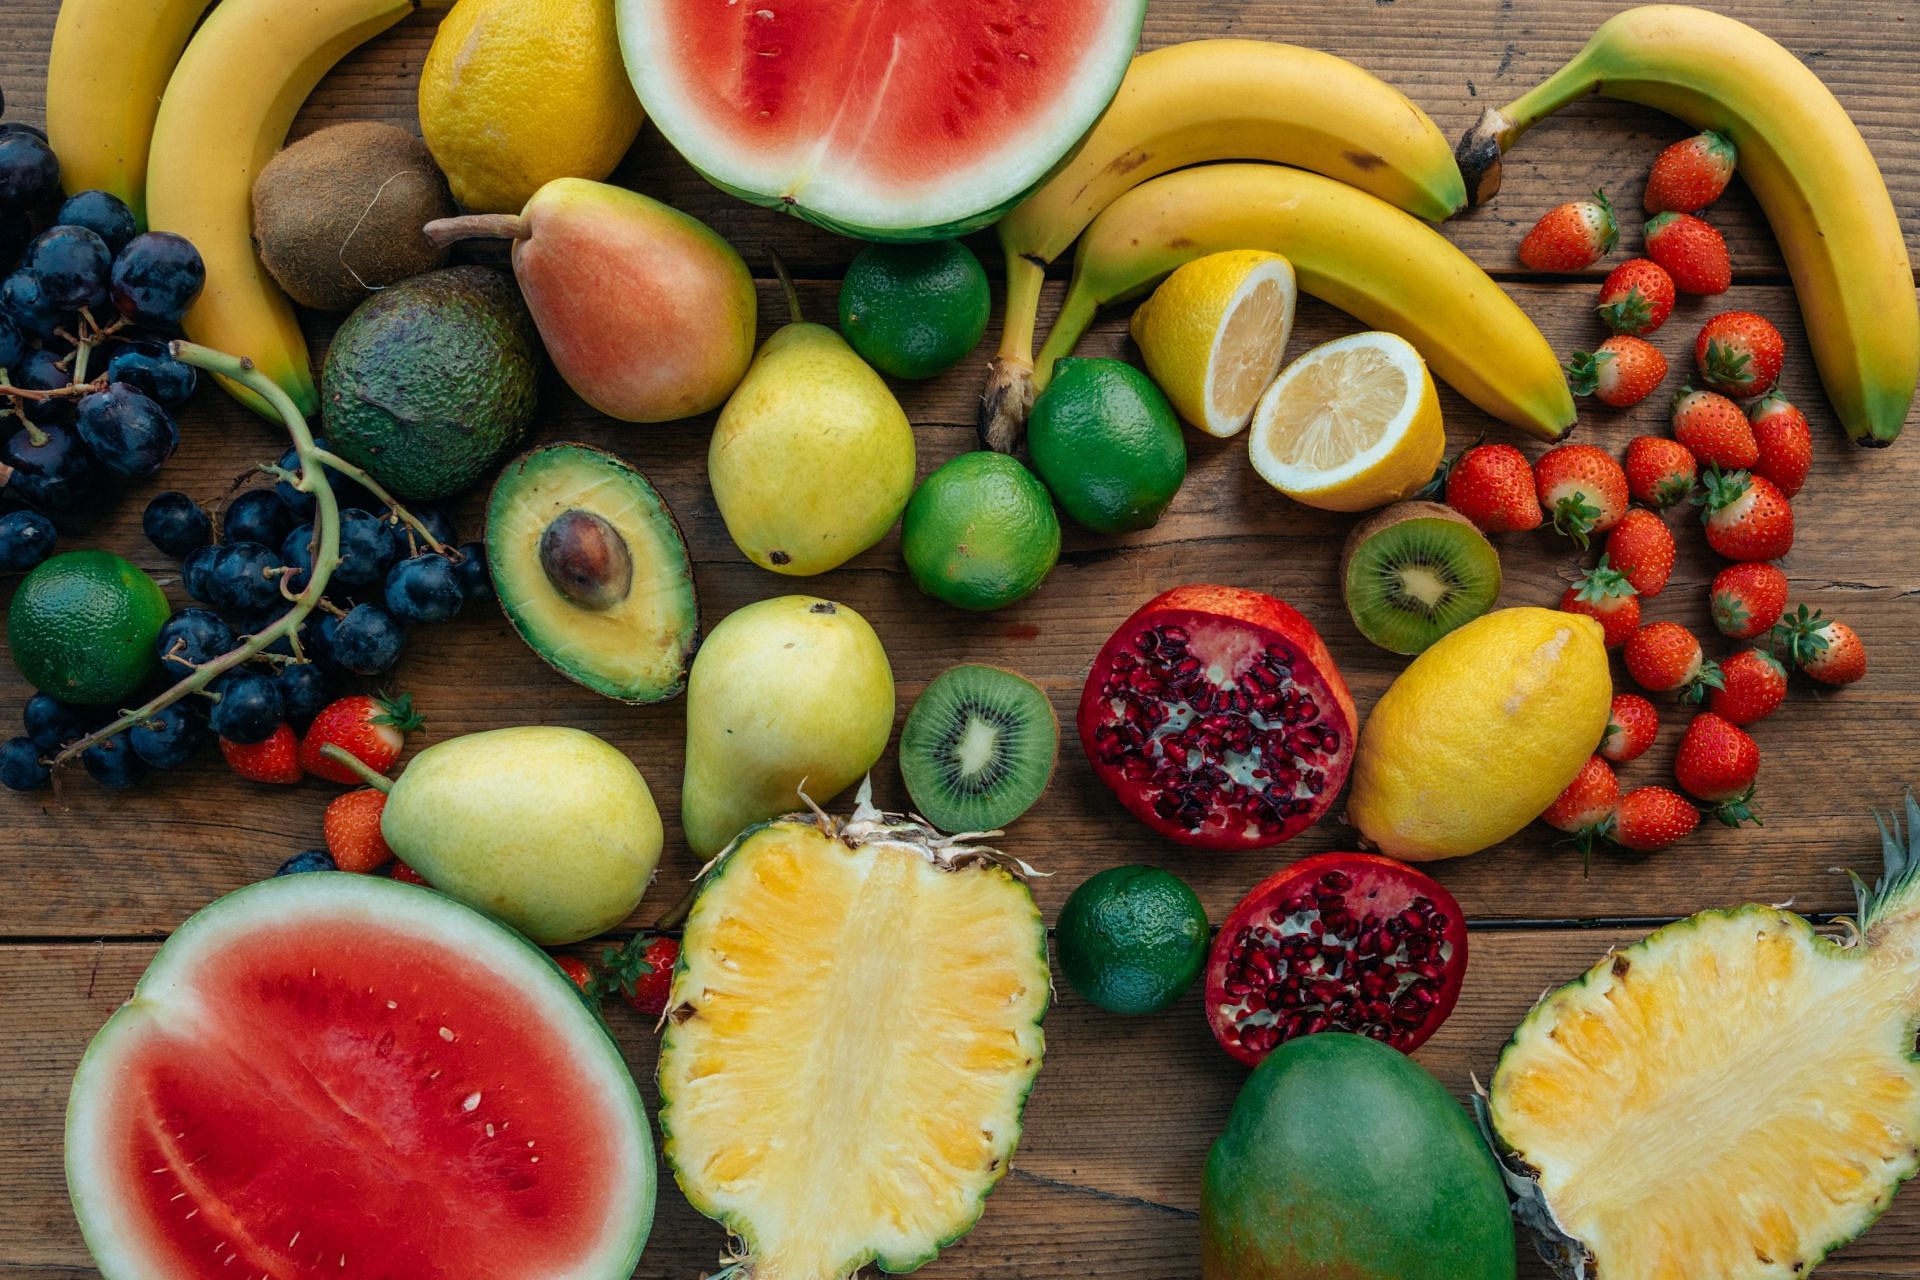 Fruits are one of the best cholesterol-lowering foods that you can include in your diet (Image via Pexels @Viktoria Slowikowska)